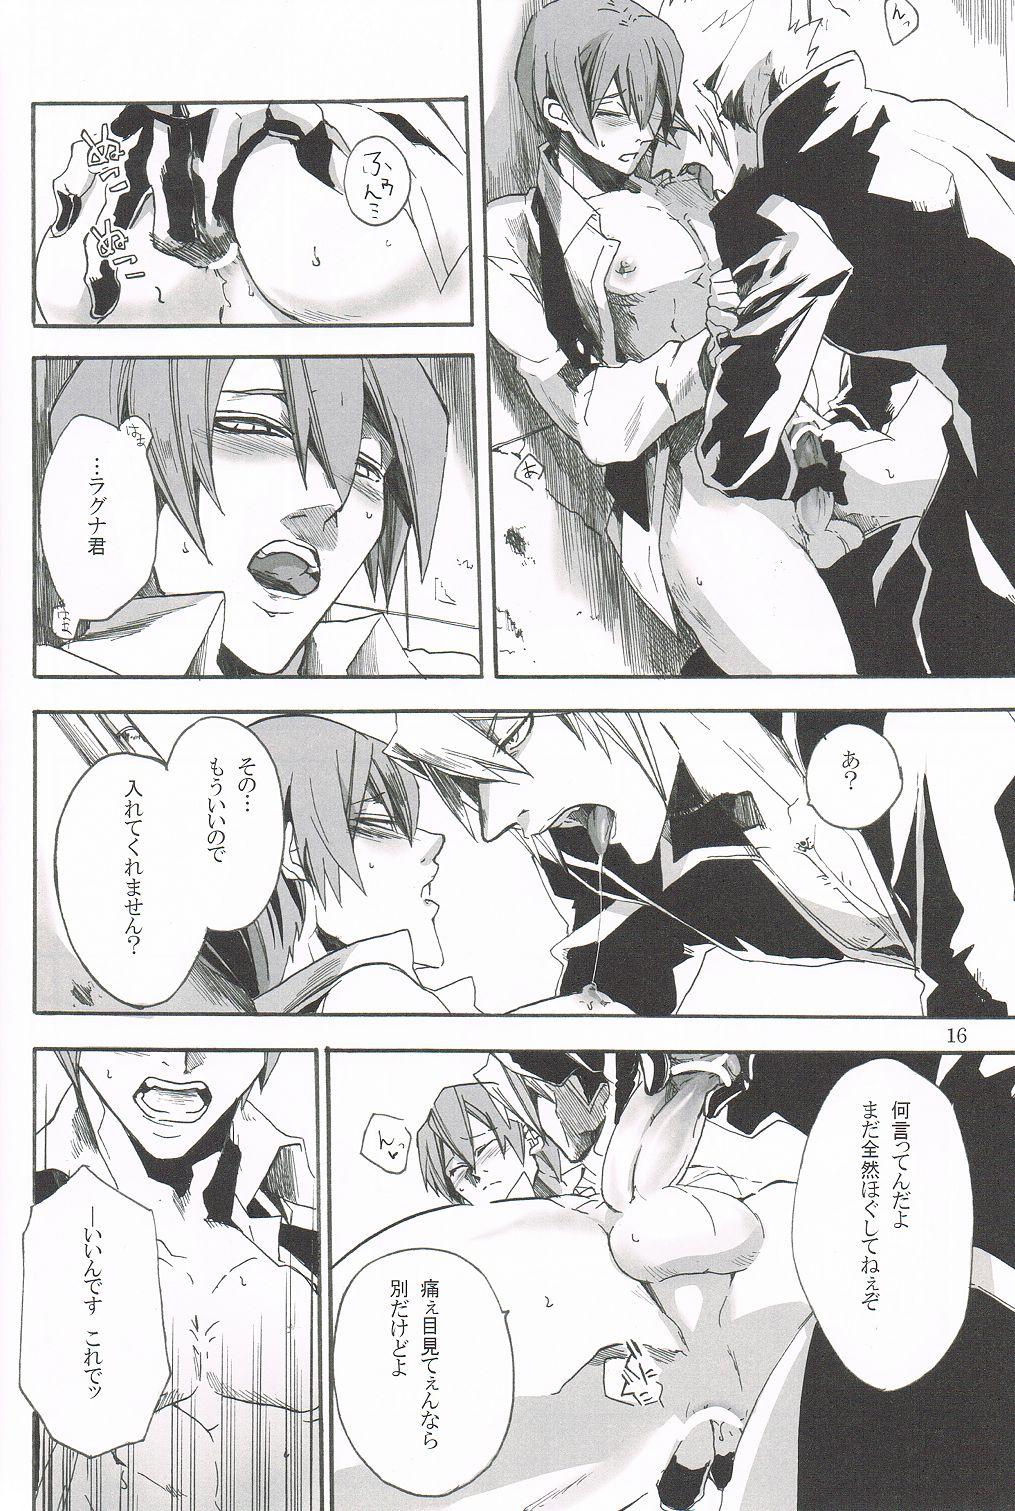 4some Distortion - Blazblue Girls Fucking - Page 14